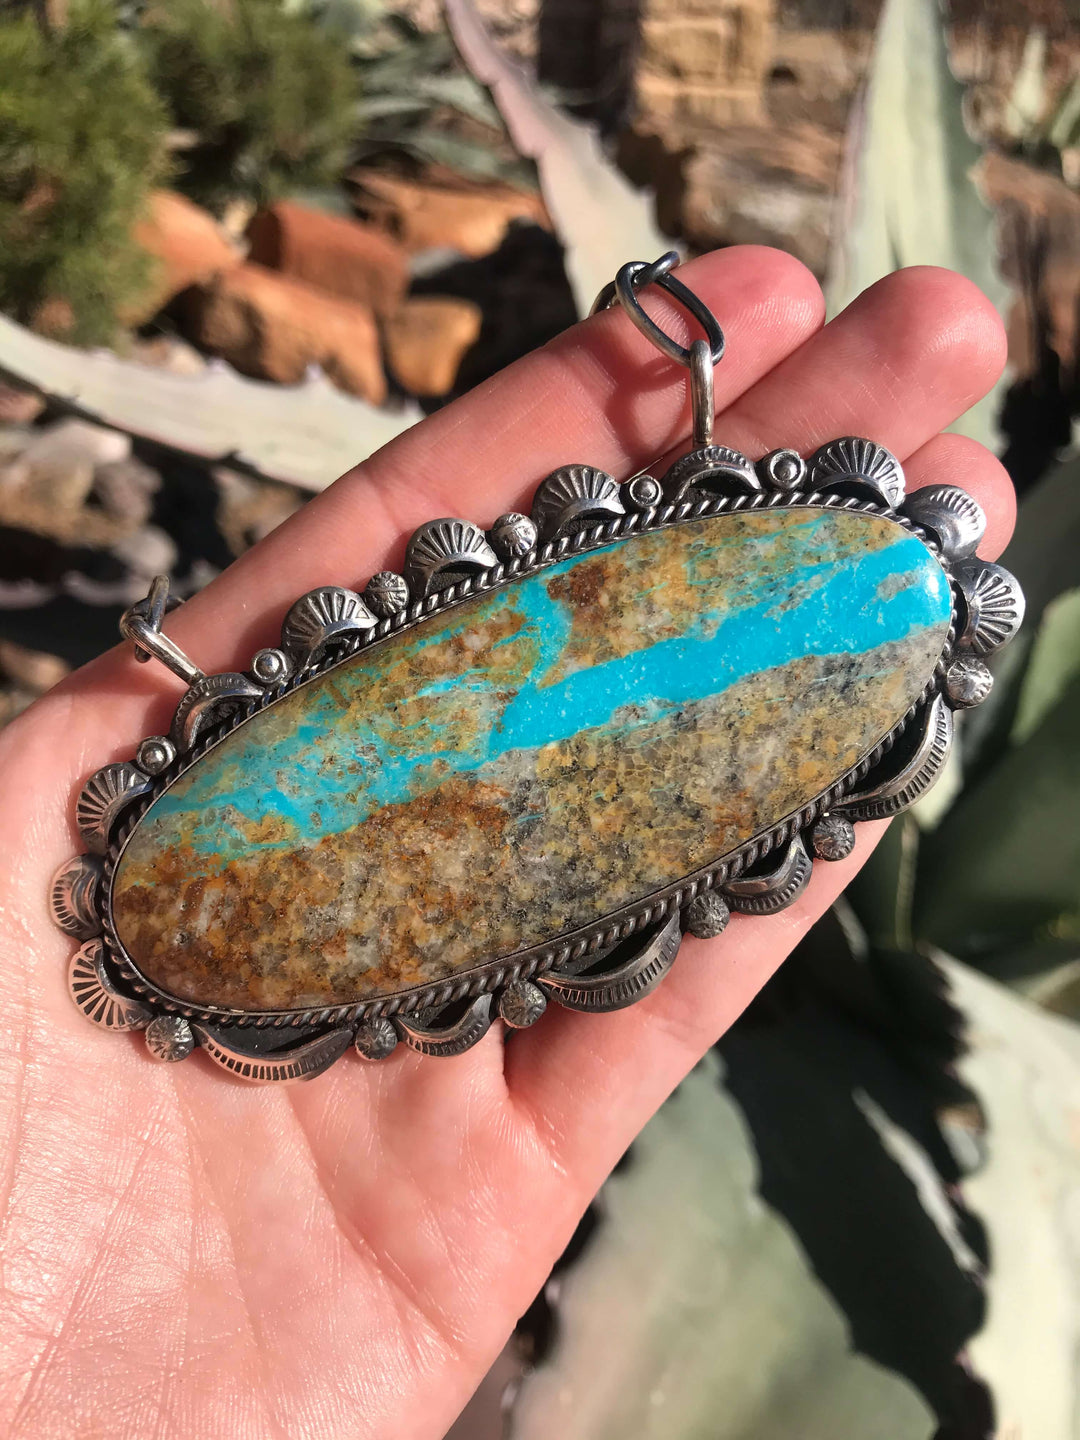 The Randlett Turquoise Ribbon Statement Necklace-Necklaces-Calli Co., Turquoise and Silver Jewelry, Native American Handmade, Zuni Tribe, Navajo Tribe, Brock Texas